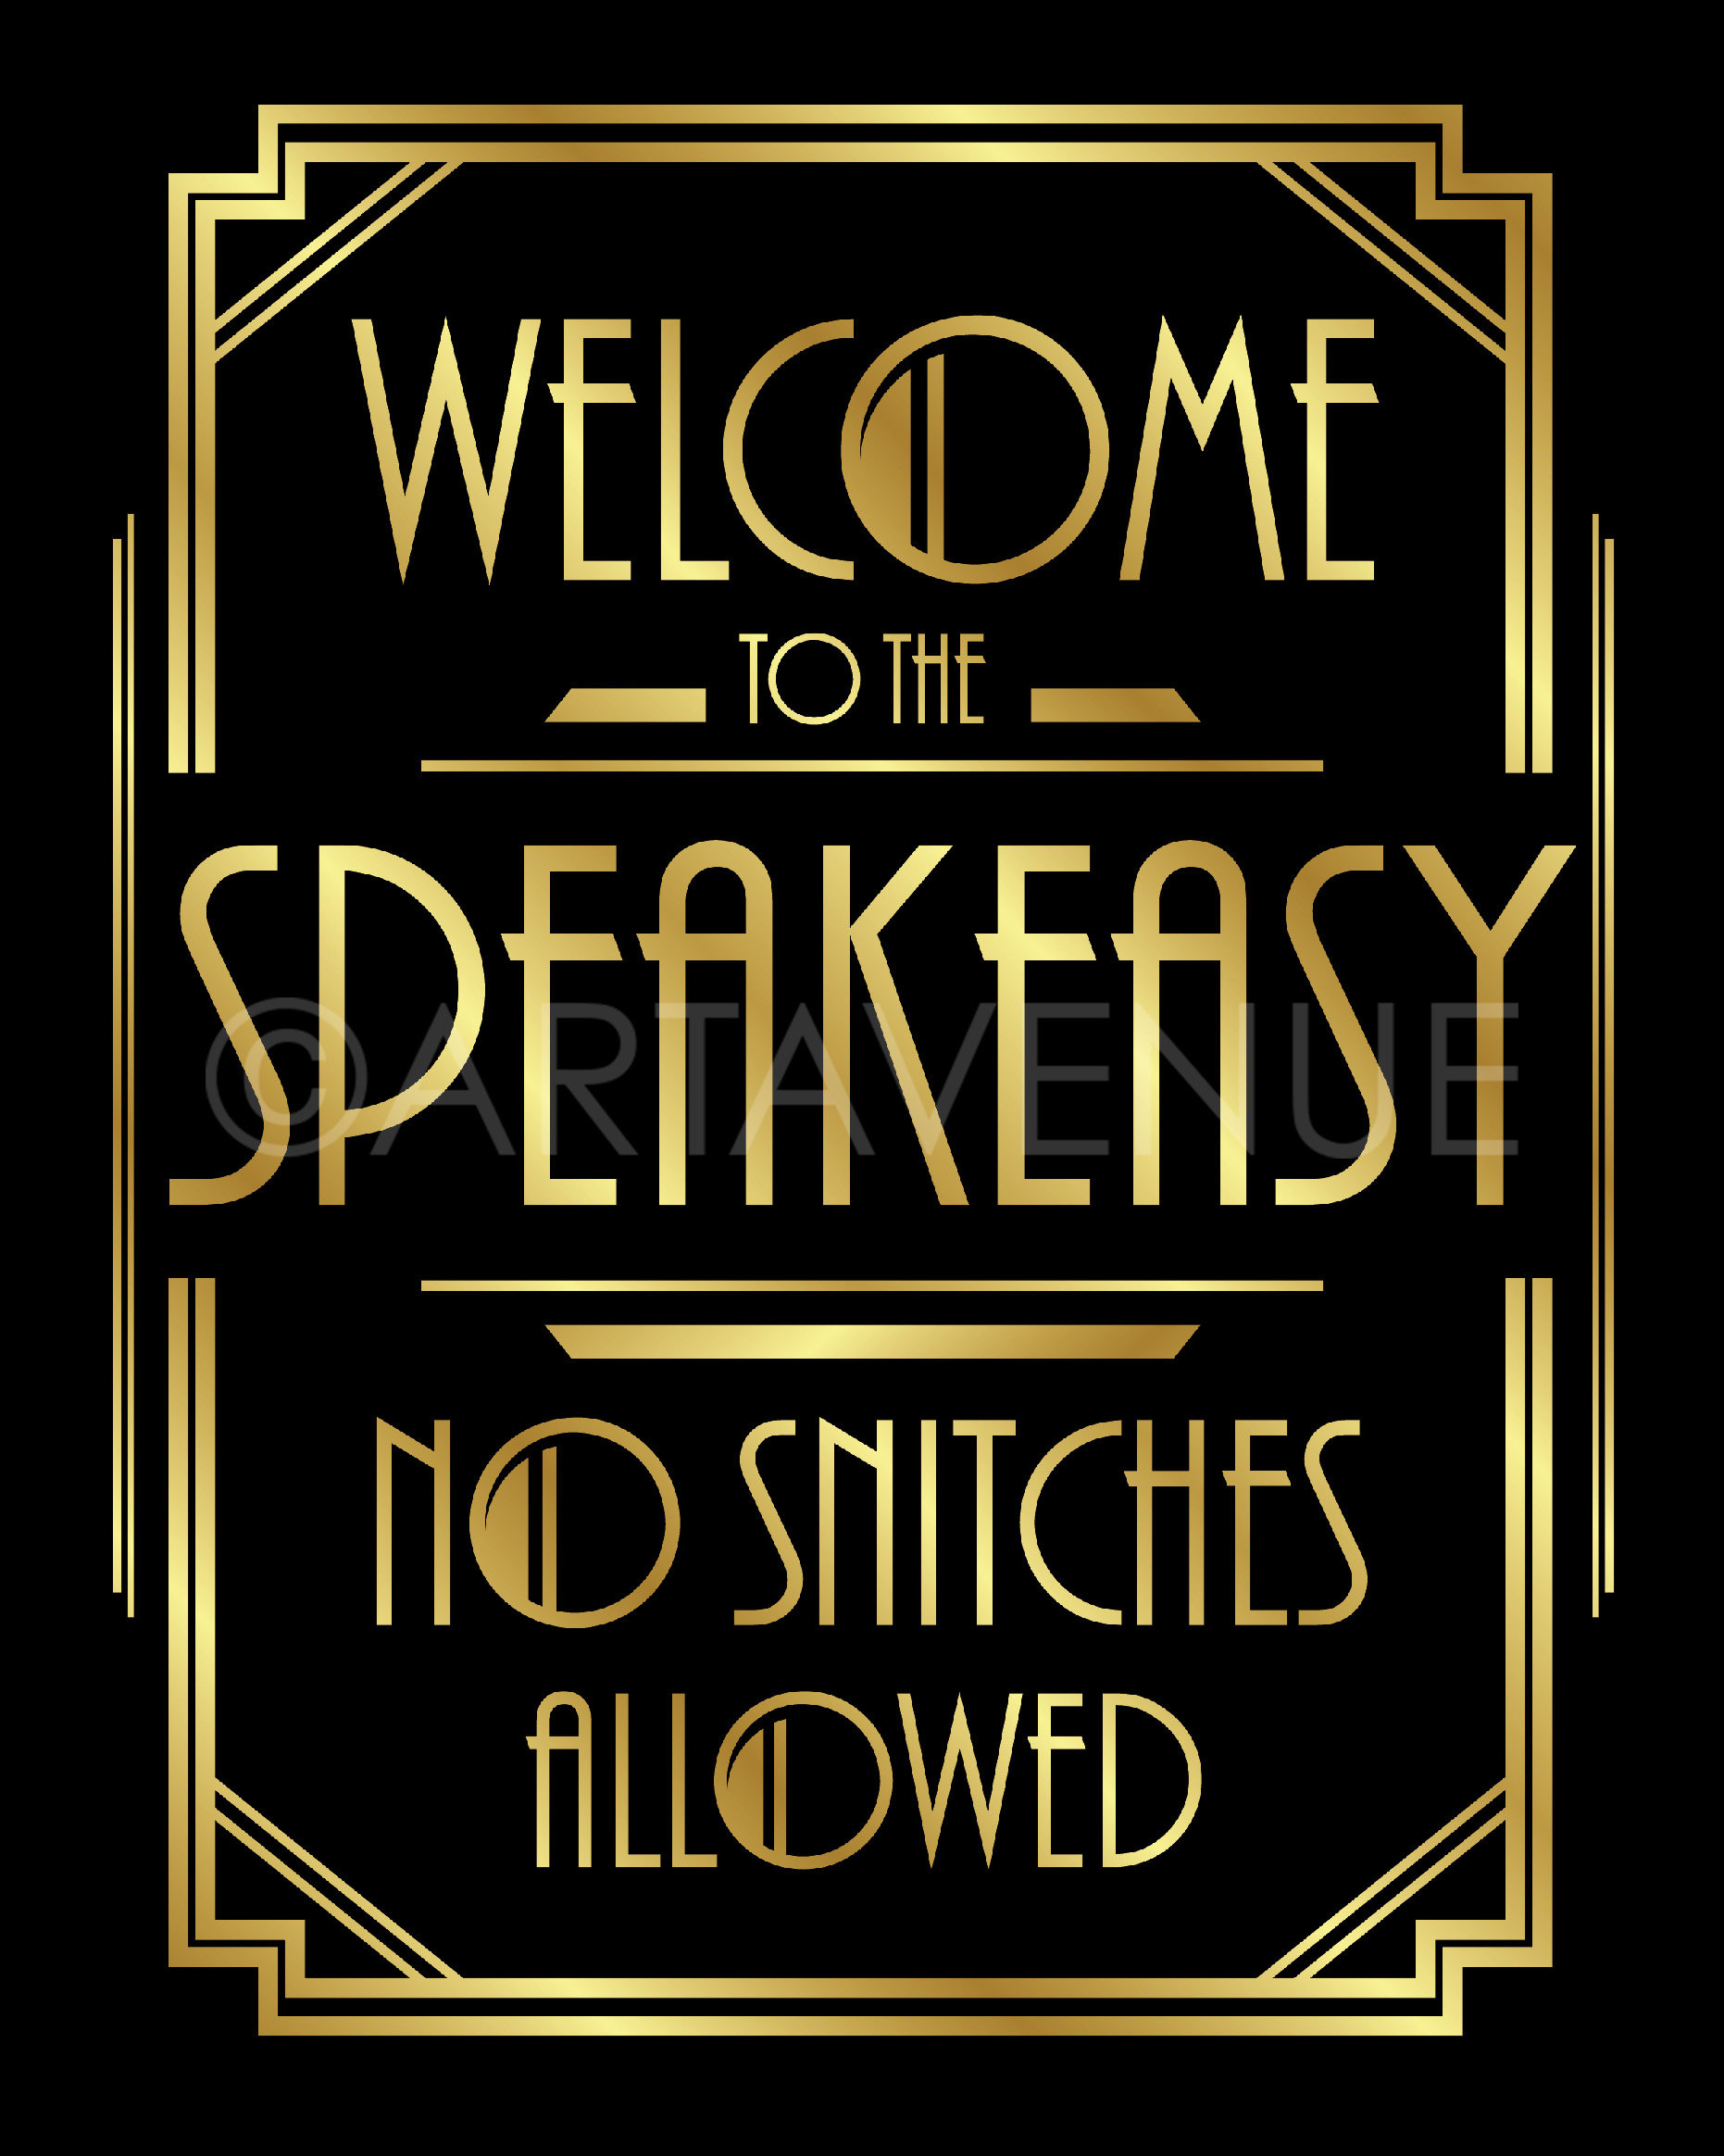 Art Deco Welcome To The Speakeasy Sign Printable Black and Etsy 日本